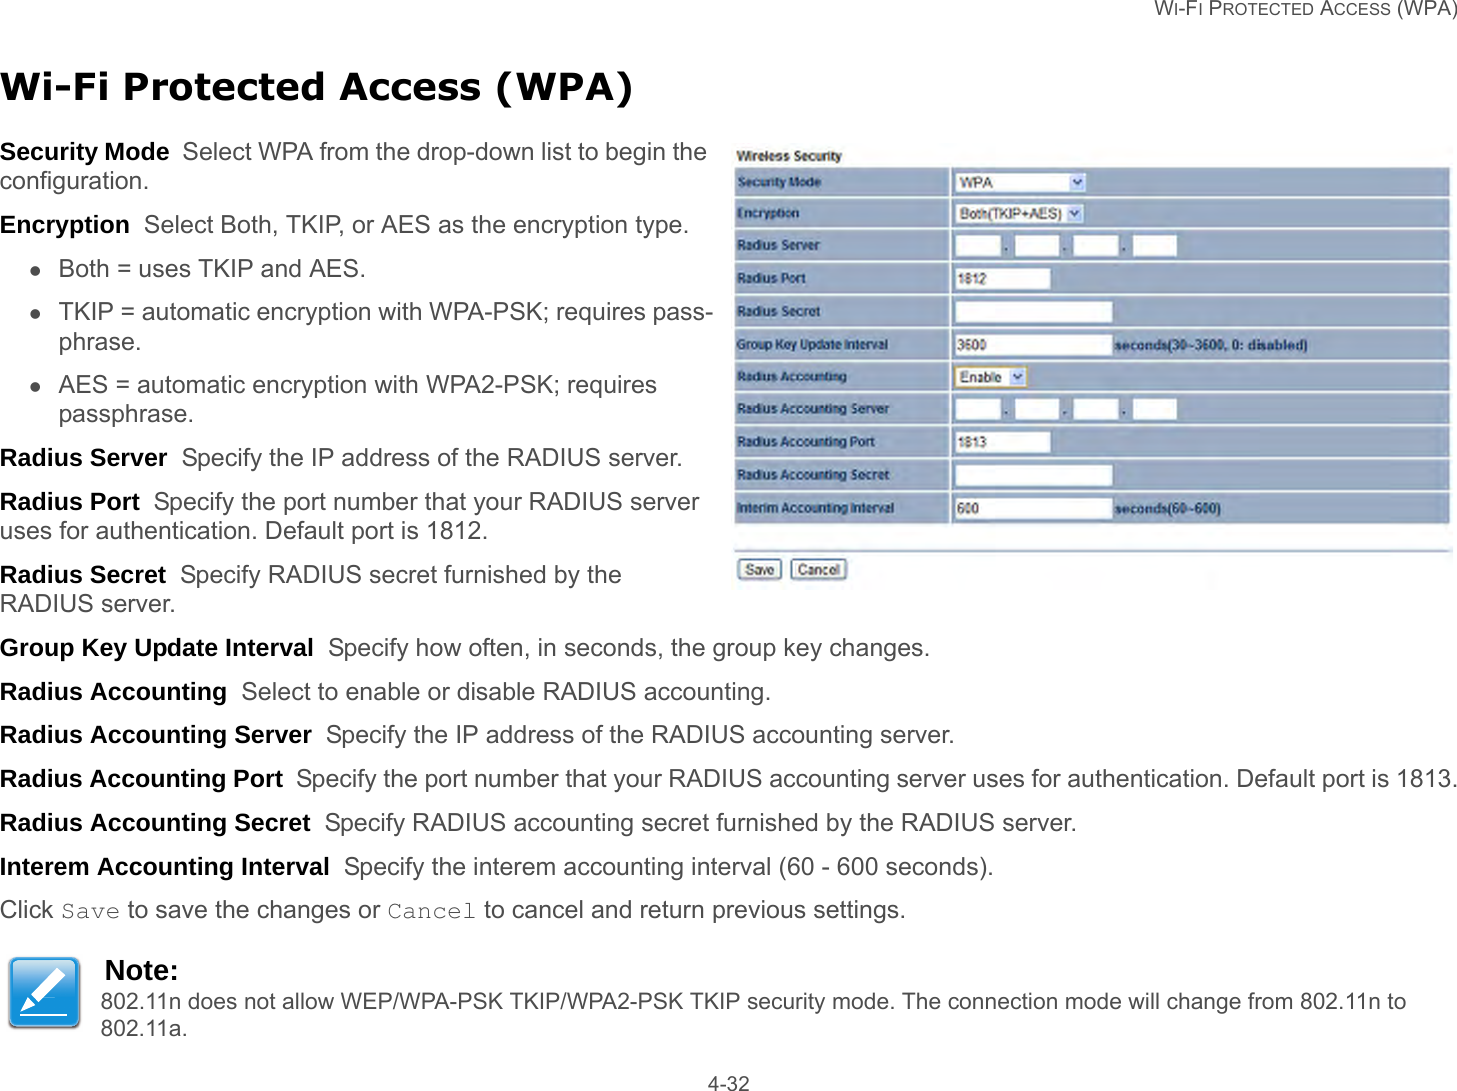   WI-FI PROTECTED ACCESS (WPA) 4-32Wi-Fi Protected Access (WPA)Security Mode  Select WPA from the drop-down list to begin the configuration.Encryption  Select Both, TKIP, or AES as the encryption type.Both = uses TKIP and AES.TKIP = automatic encryption with WPA-PSK; requires pass-phrase.AES = automatic encryption with WPA2-PSK; requires passphrase.Radius Server  Specify the IP address of the RADIUS server.Radius Port  Specify the port number that your RADIUS server uses for authentication. Default port is 1812.Radius Secret  Specify RADIUS secret furnished by the RADIUS server.Group Key Update Interval  Specify how often, in seconds, the group key changes.Radius Accounting  Select to enable or disable RADIUS accounting.Radius Accounting Server  Specify the IP address of the RADIUS accounting server.Radius Accounting Port  Specify the port number that your RADIUS accounting server uses for authentication. Default port is 1813.Radius Accounting Secret  Specify RADIUS accounting secret furnished by the RADIUS server.Interem Accounting Interval  Specify the interem accounting interval (60 - 600 seconds).Click Save to save the changes or Cancel to cancel and return previous settings.Note:802.11n does not allow WEP/WPA-PSK TKIP/WPA2-PSK TKIP security mode. The connection mode will change from 802.11n to 802.11a.